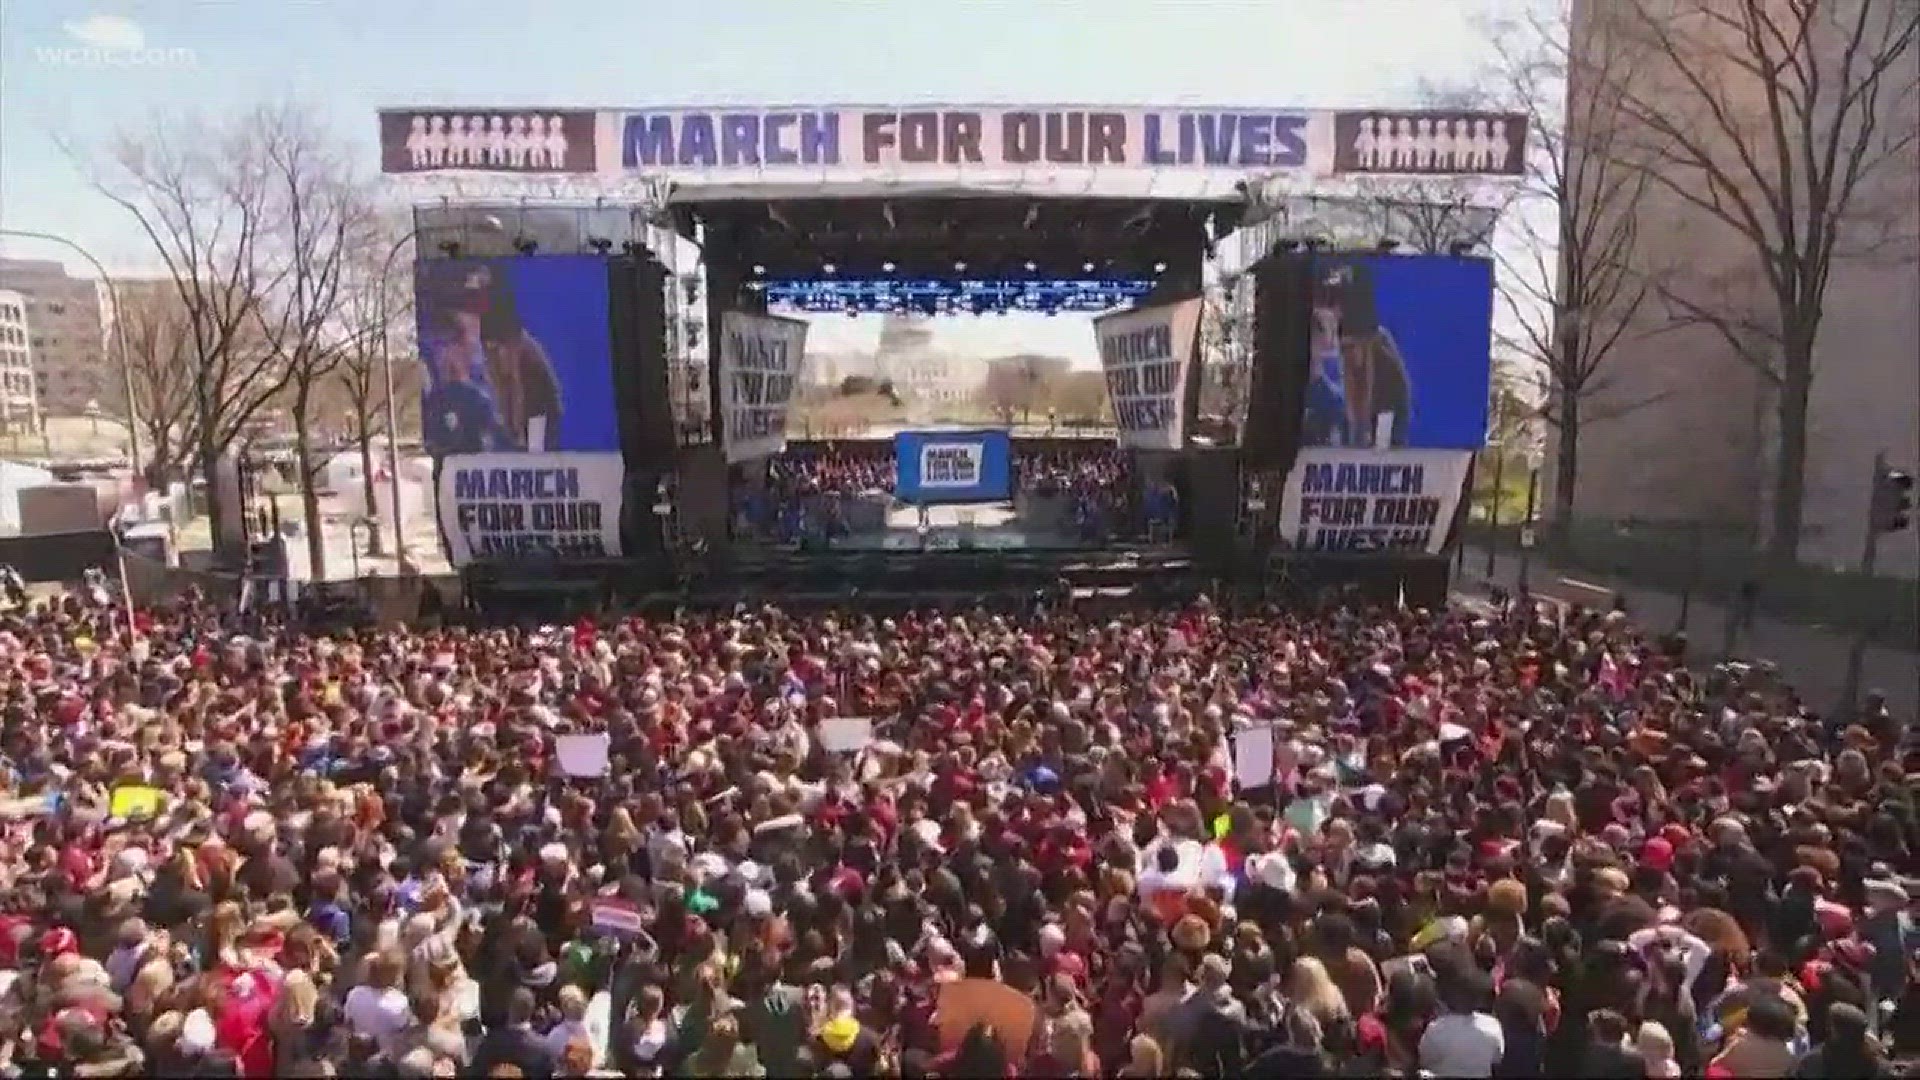 March For Our Lives rally in Washington, D.C.